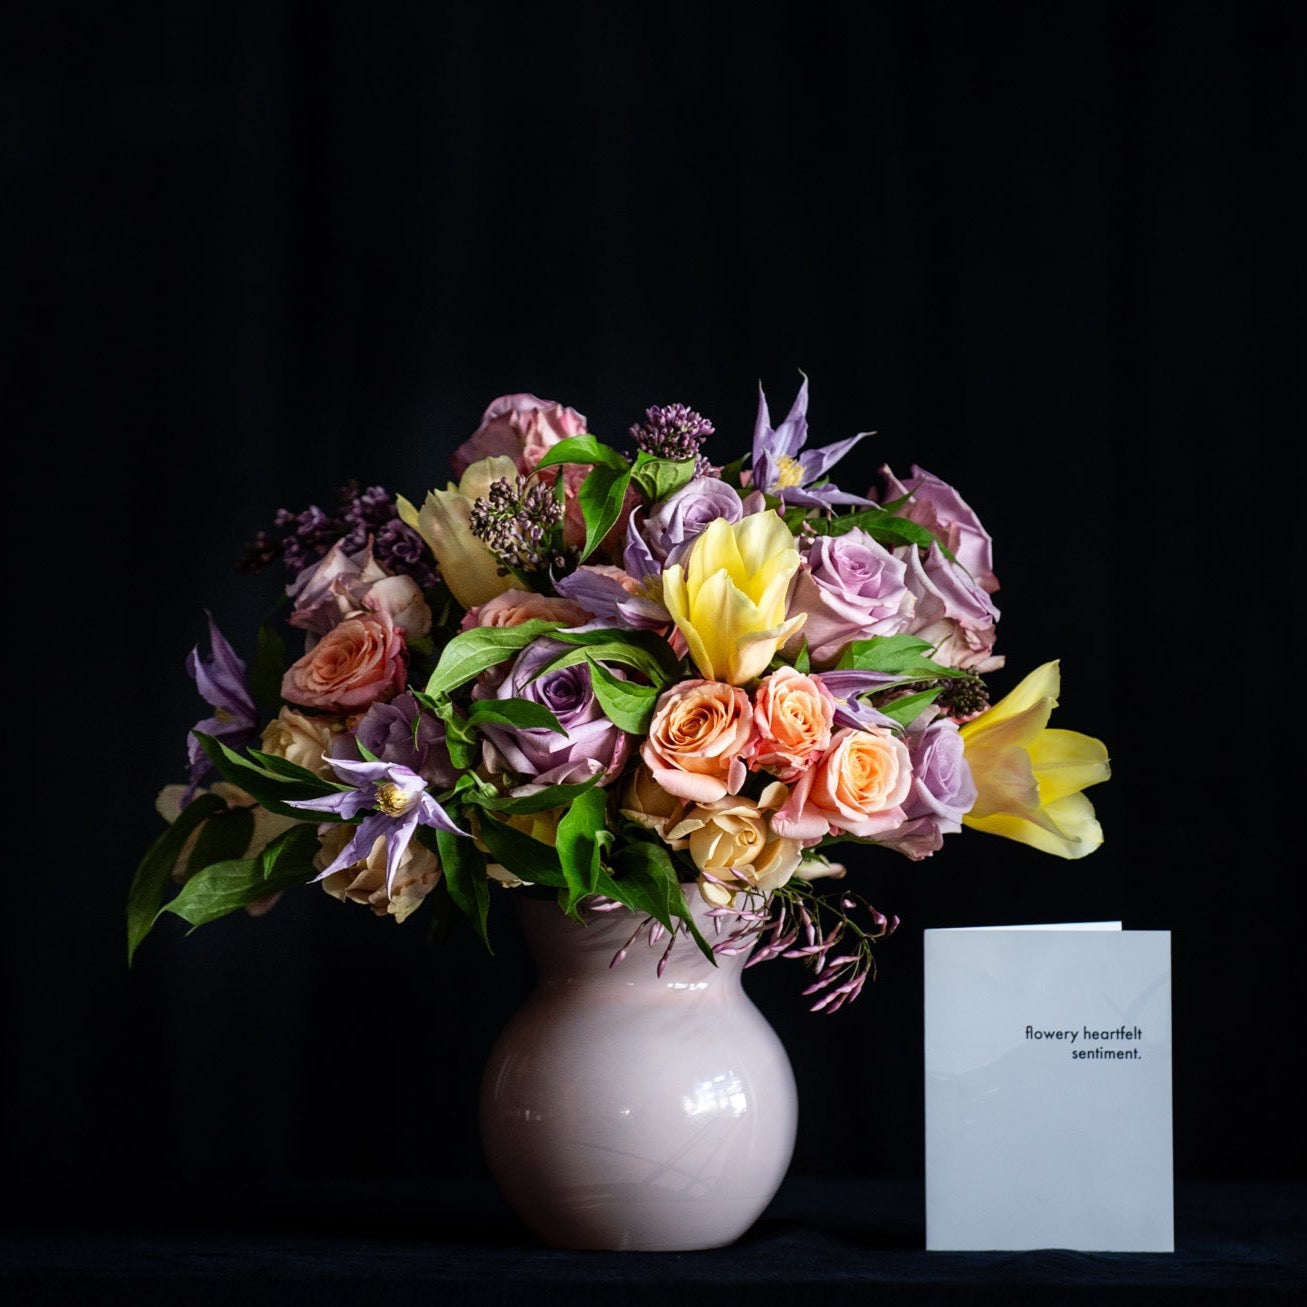 Mother's Day Flower son roses, tulips and season stems in lilac and peach tones